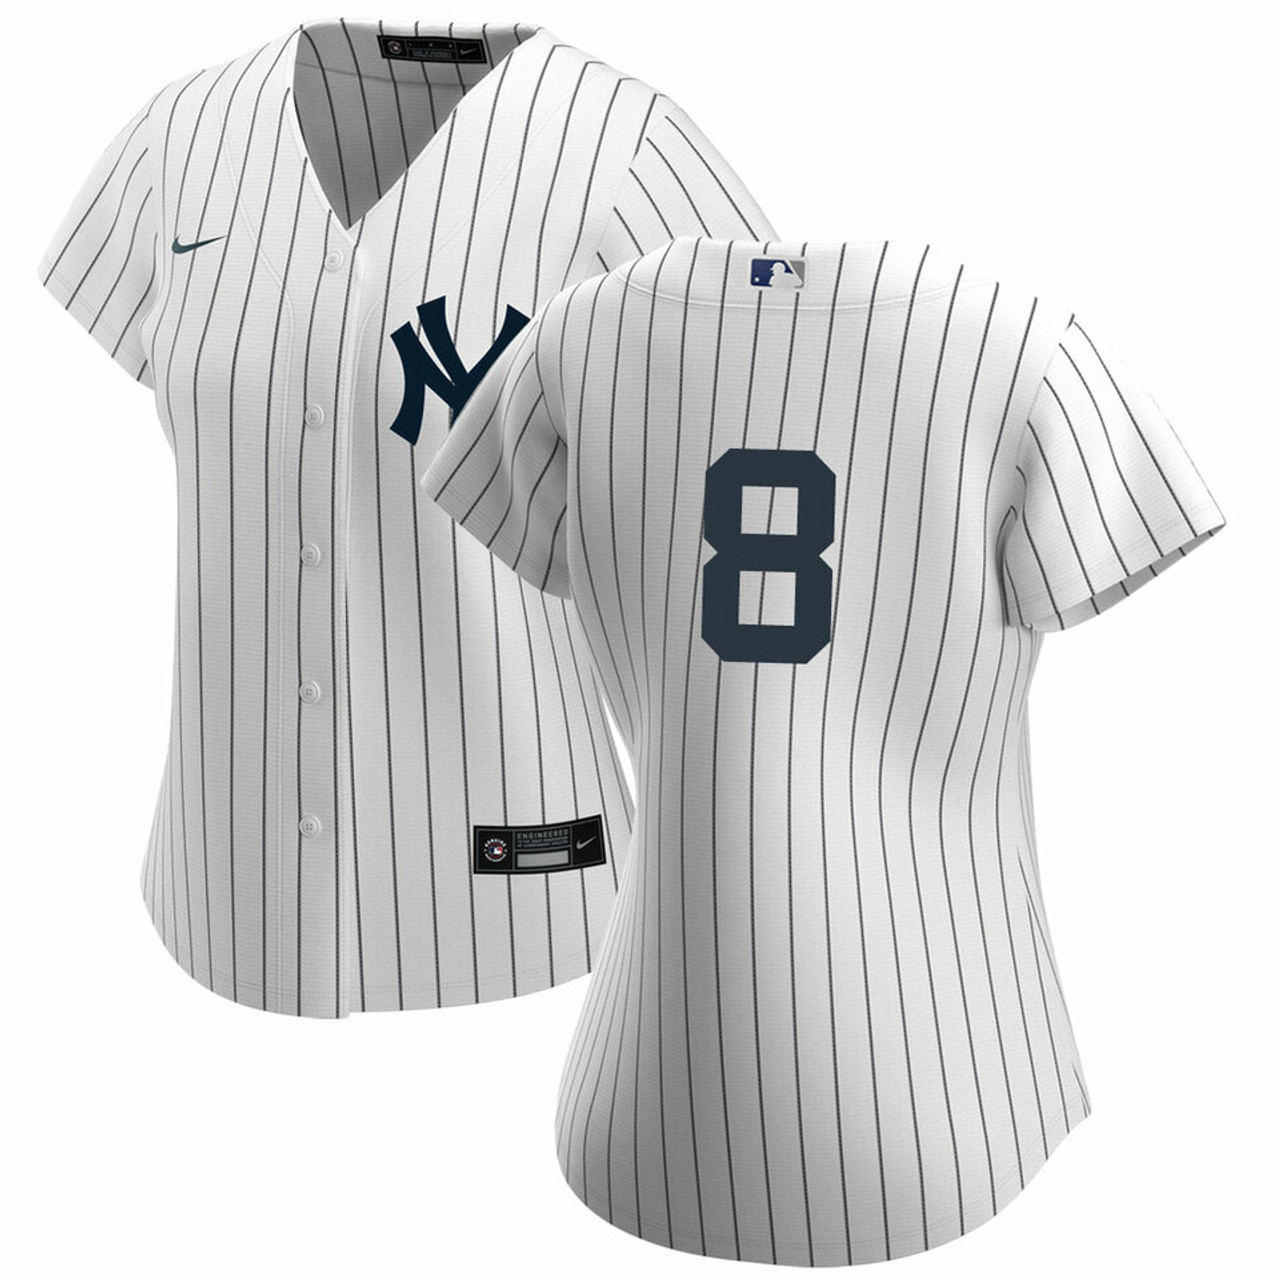 Nike Yogi Berra No Name Ladies Home Jersey - Yankees Home Number Only Jersey